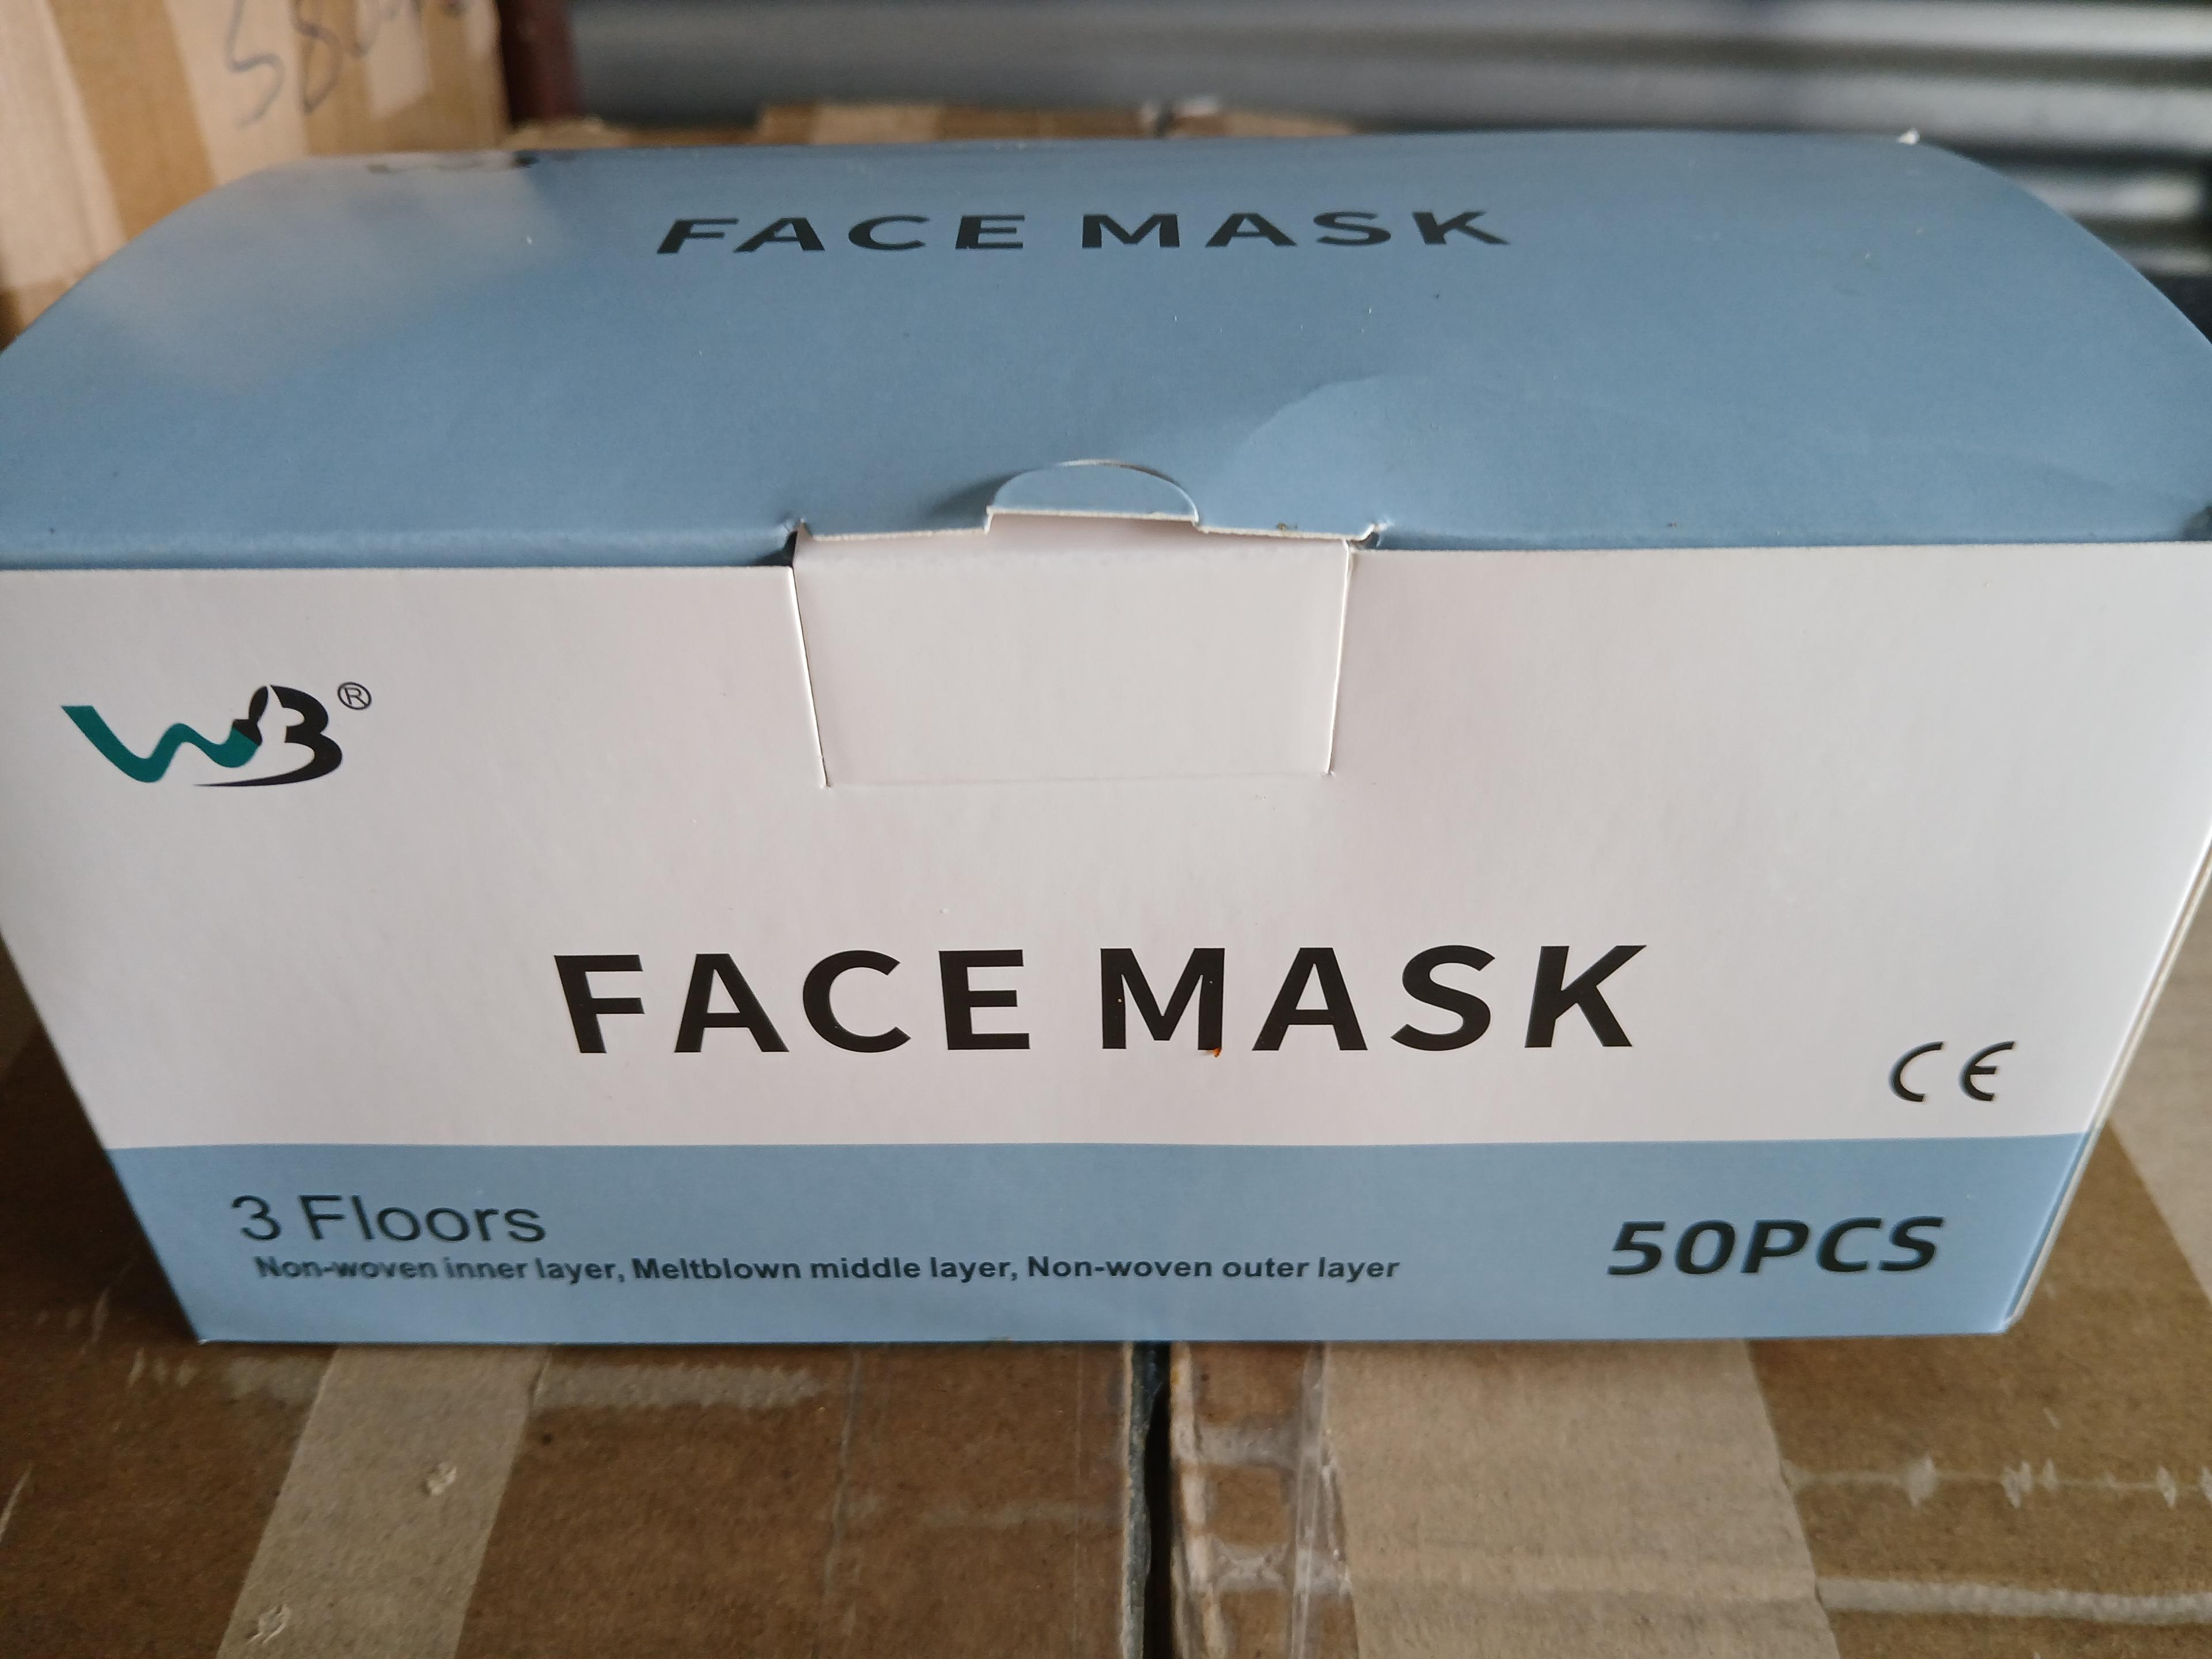 W3 3 FLOORS Face Mask W/ Non-Woven Inner Layer and melt blown middle layer, Non woven outer layer. T